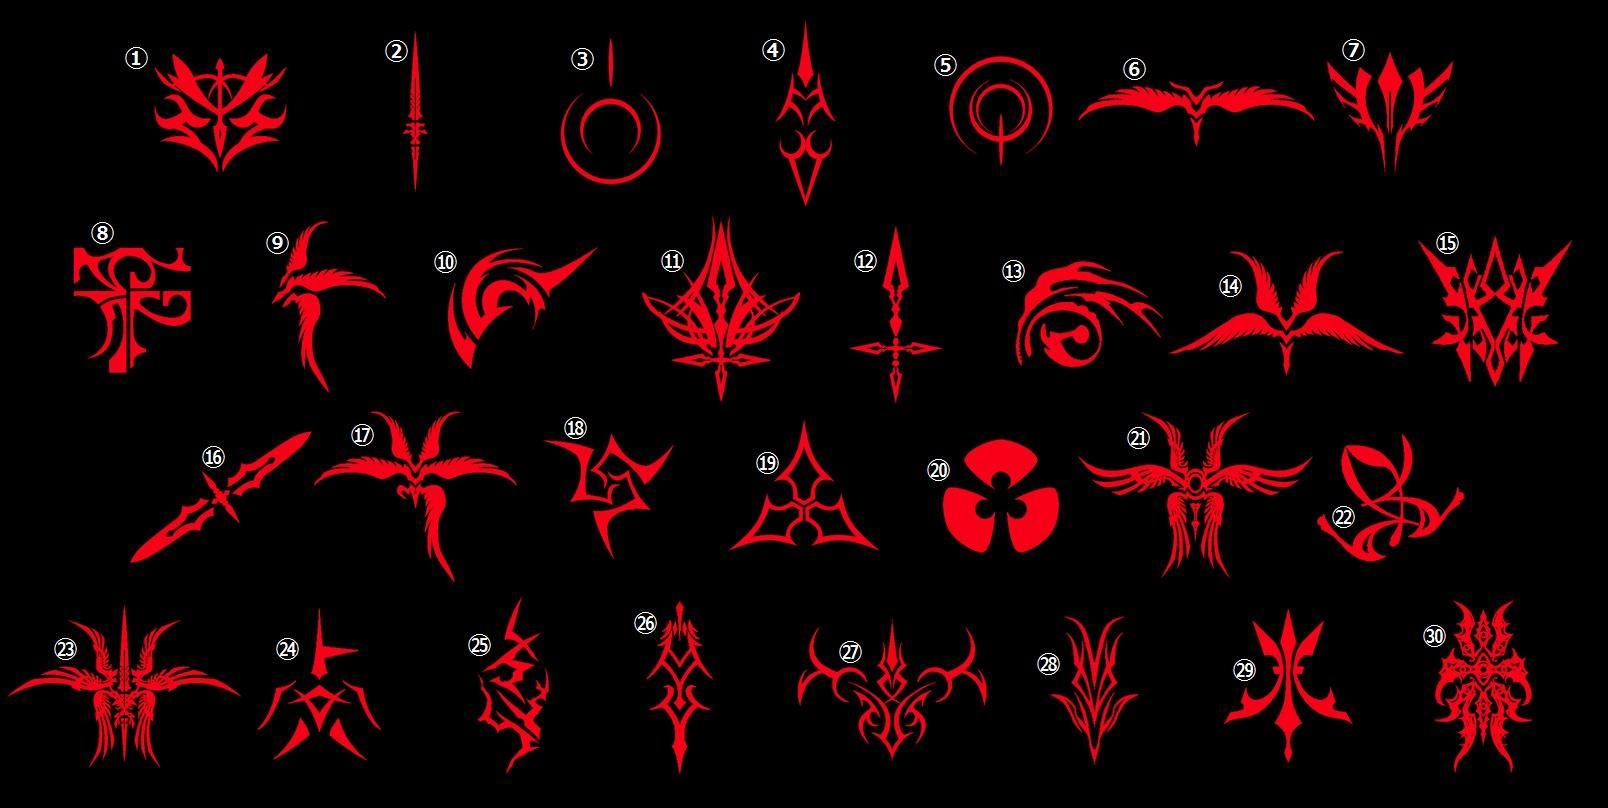 What Are Some Instantly Recognizable Logo Symbols From Anime?